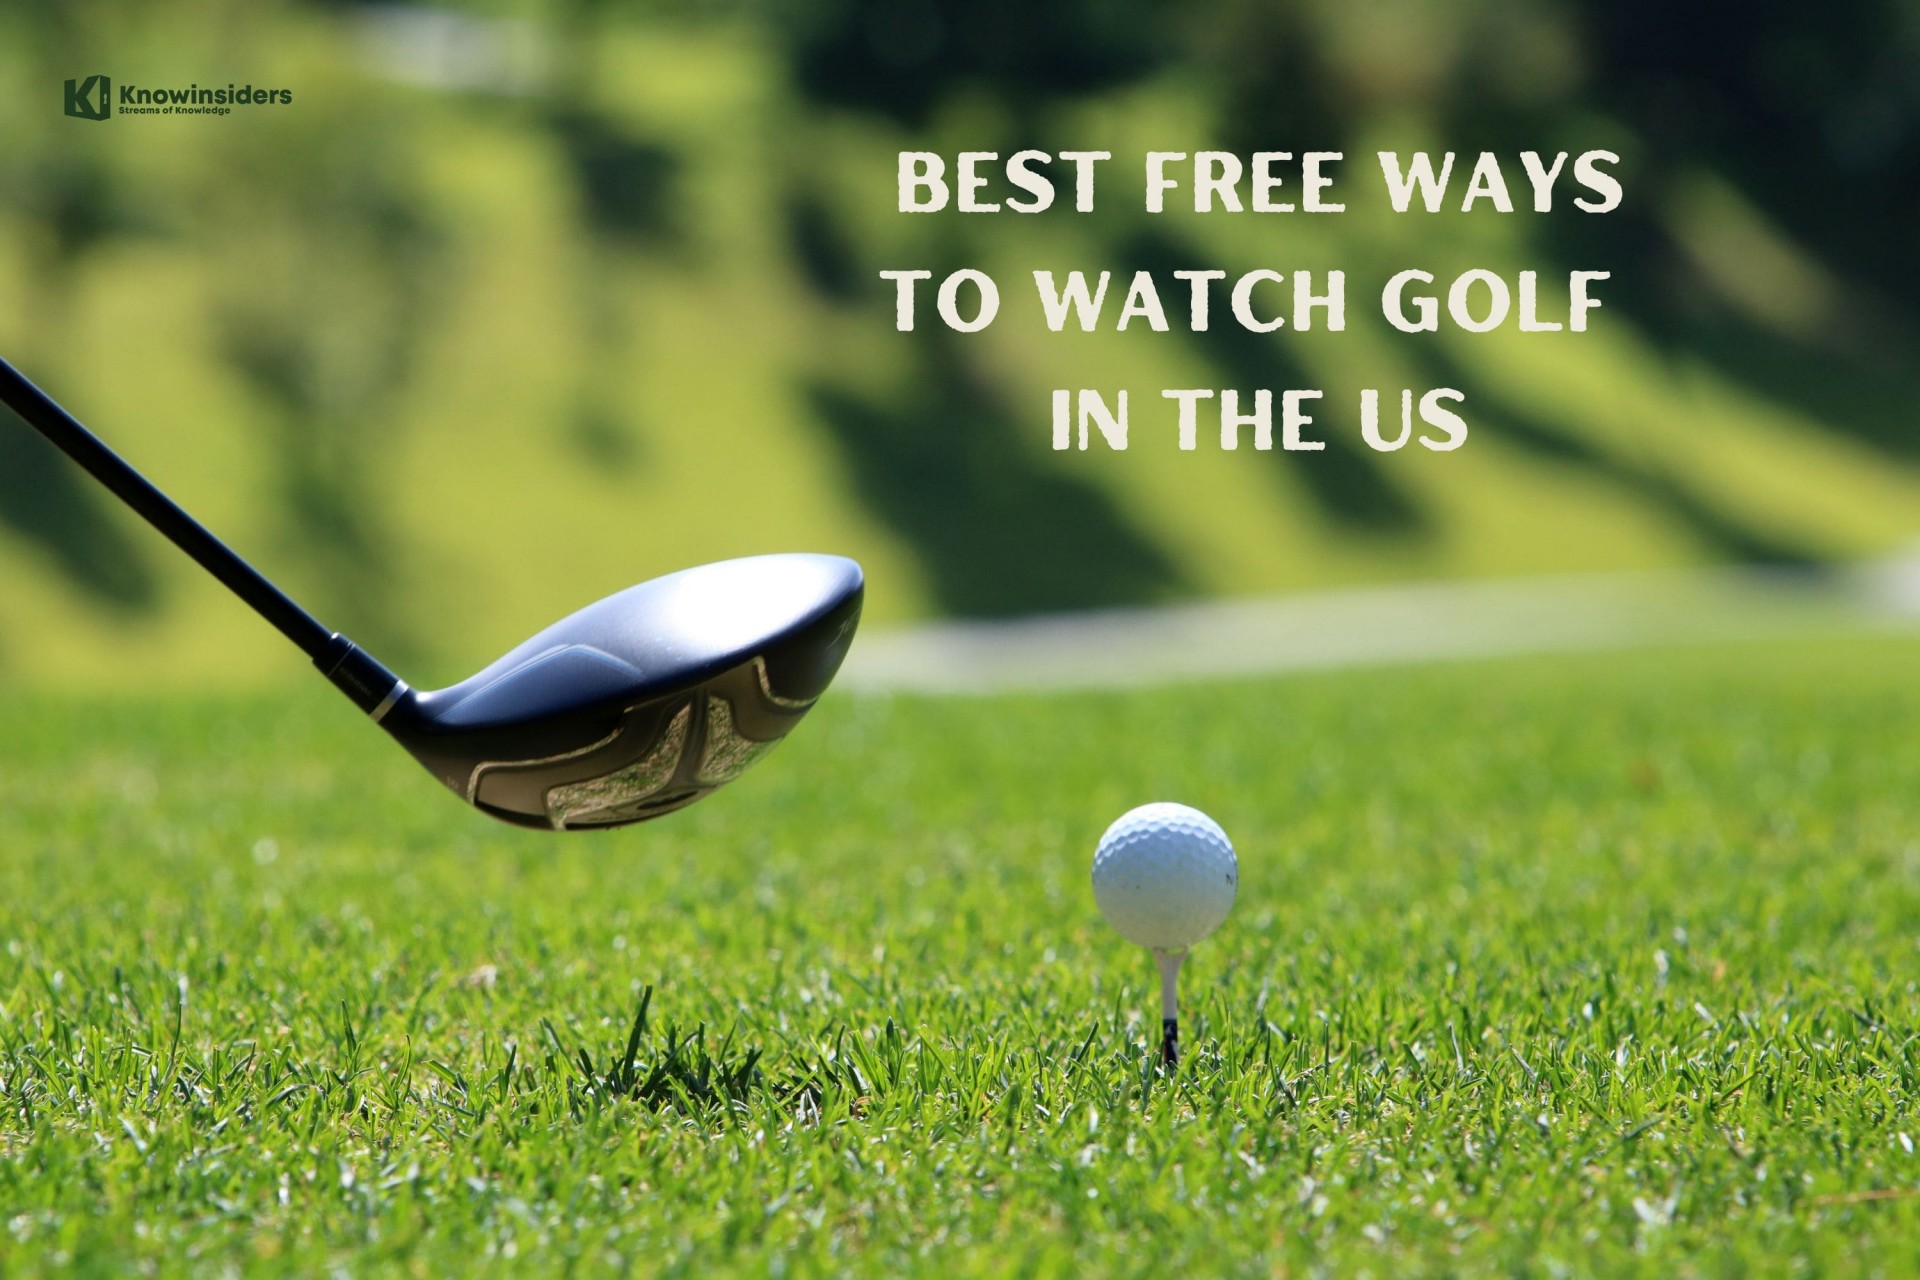 Best Free Ways To Watch Golf In The US